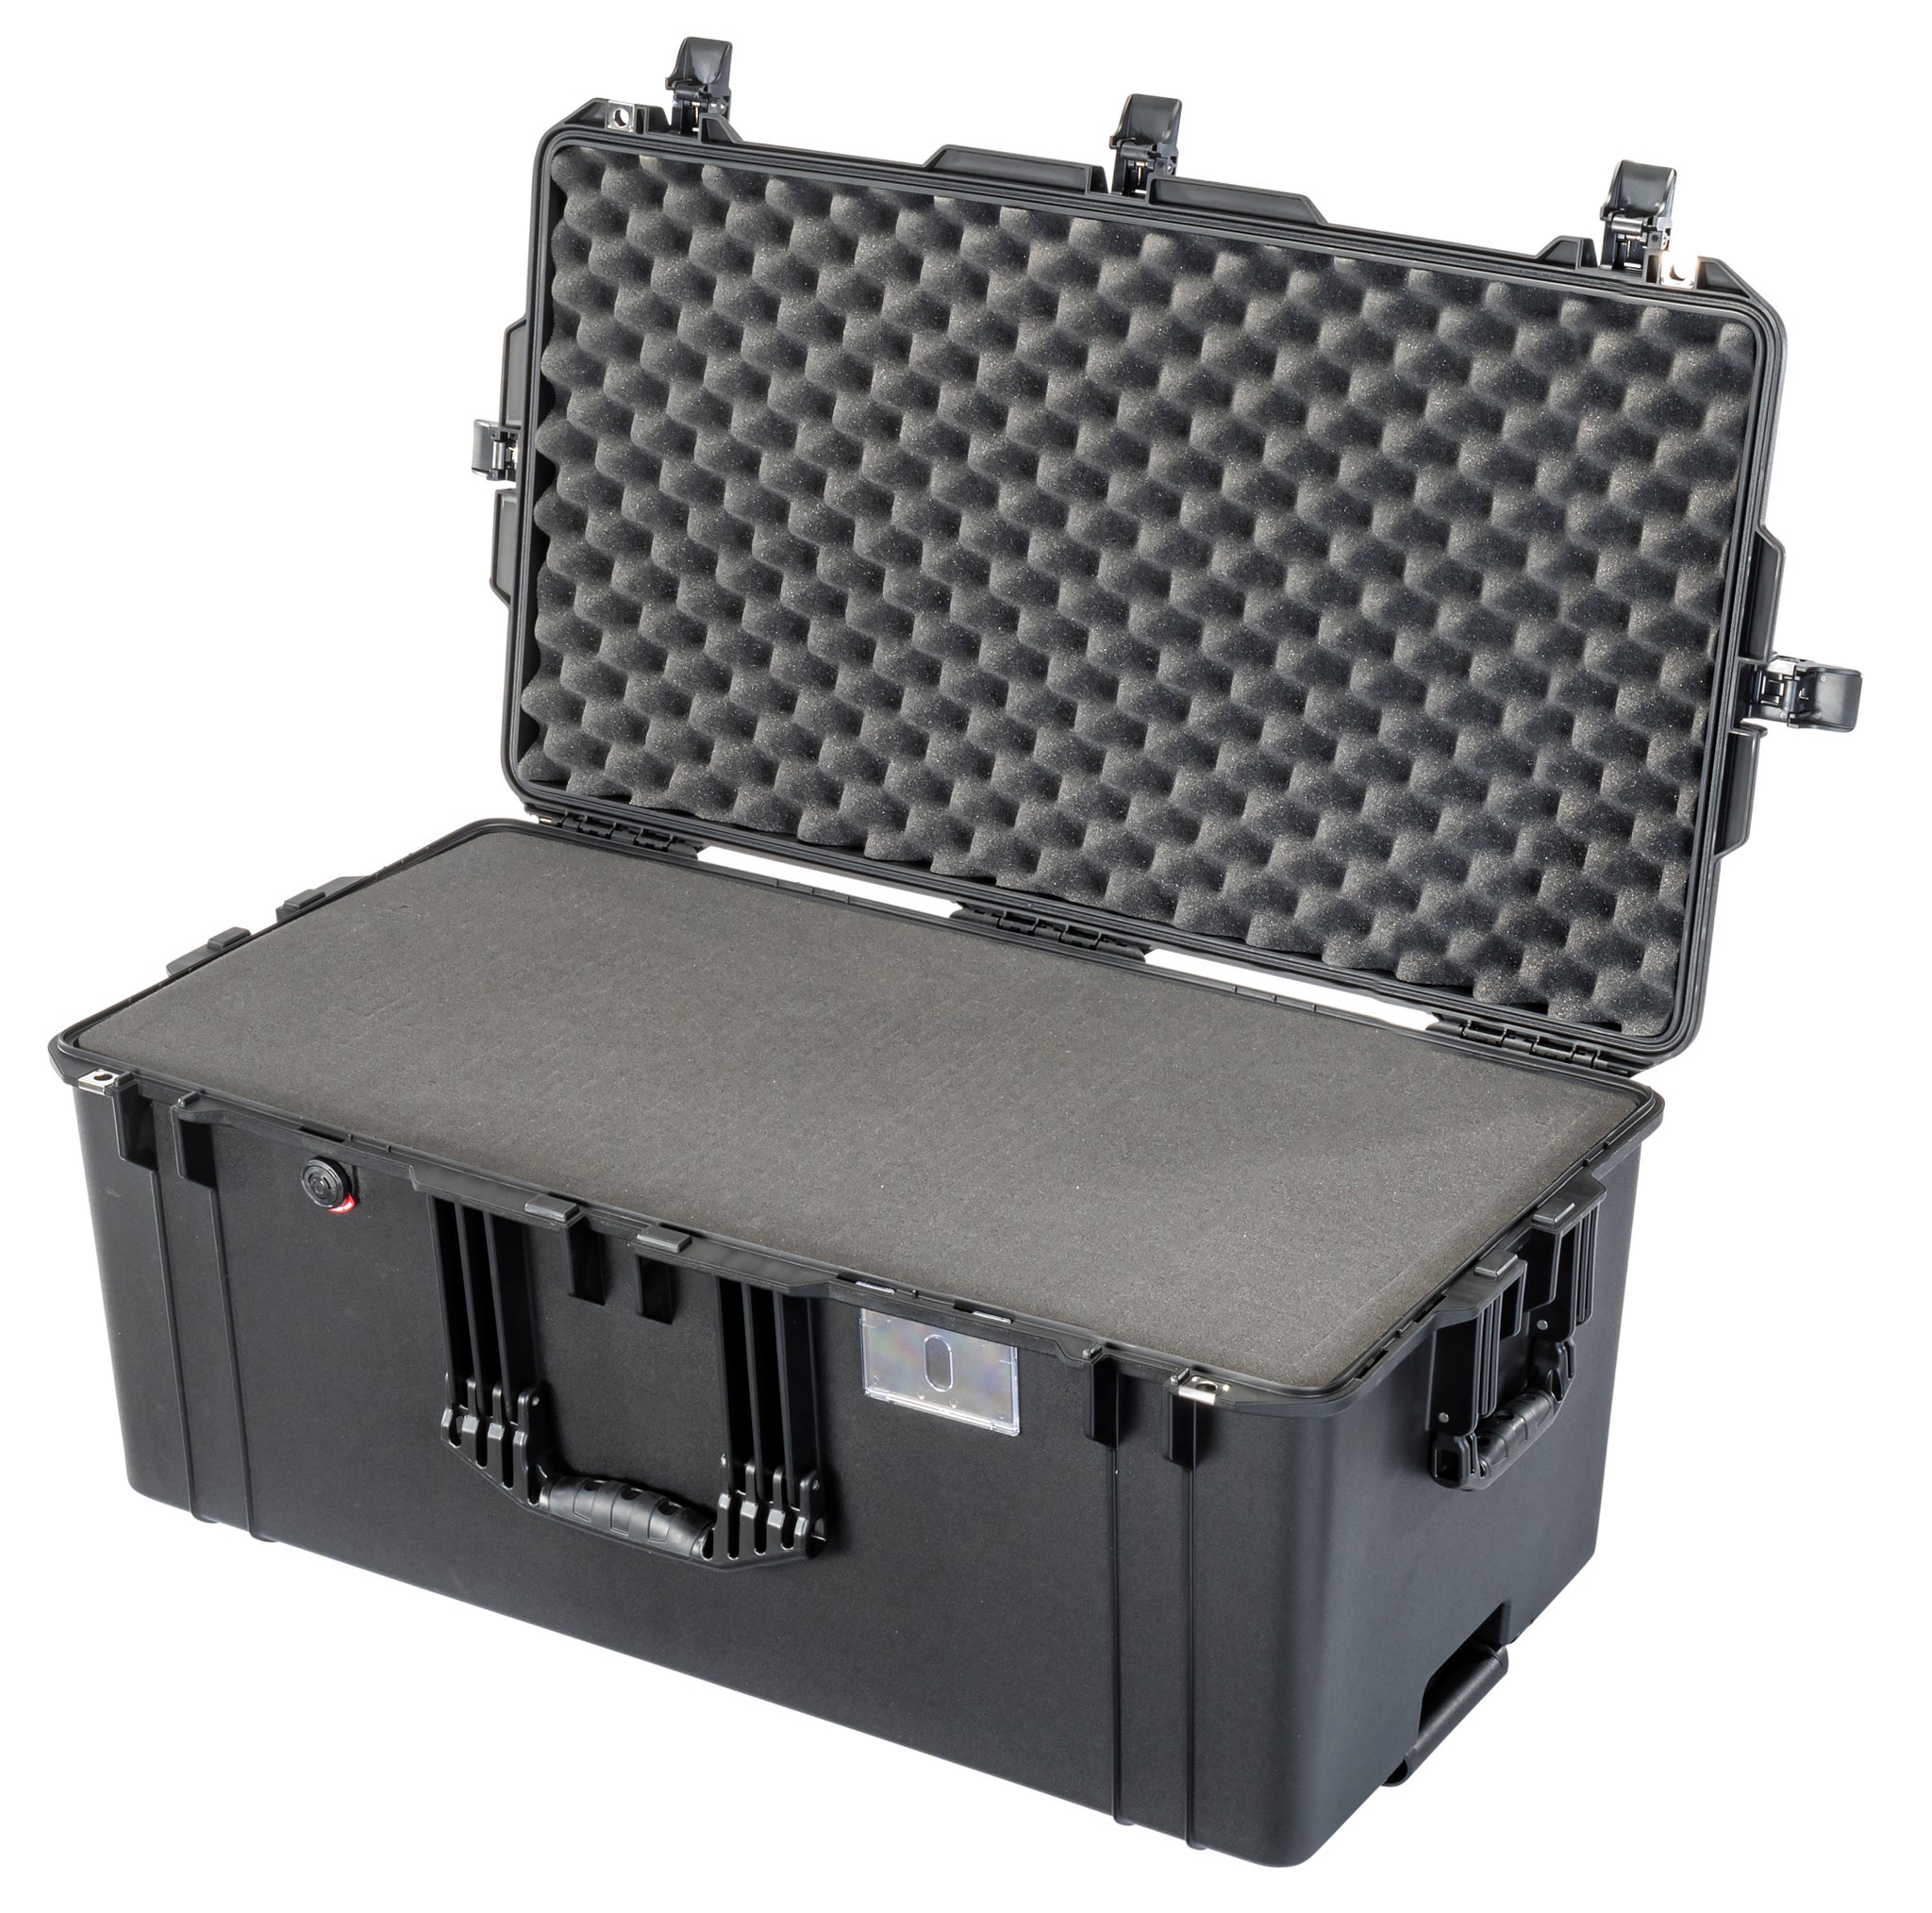 New Pelican Air 1646 Case Unveiled - Largest Pelican Air Case to Date!